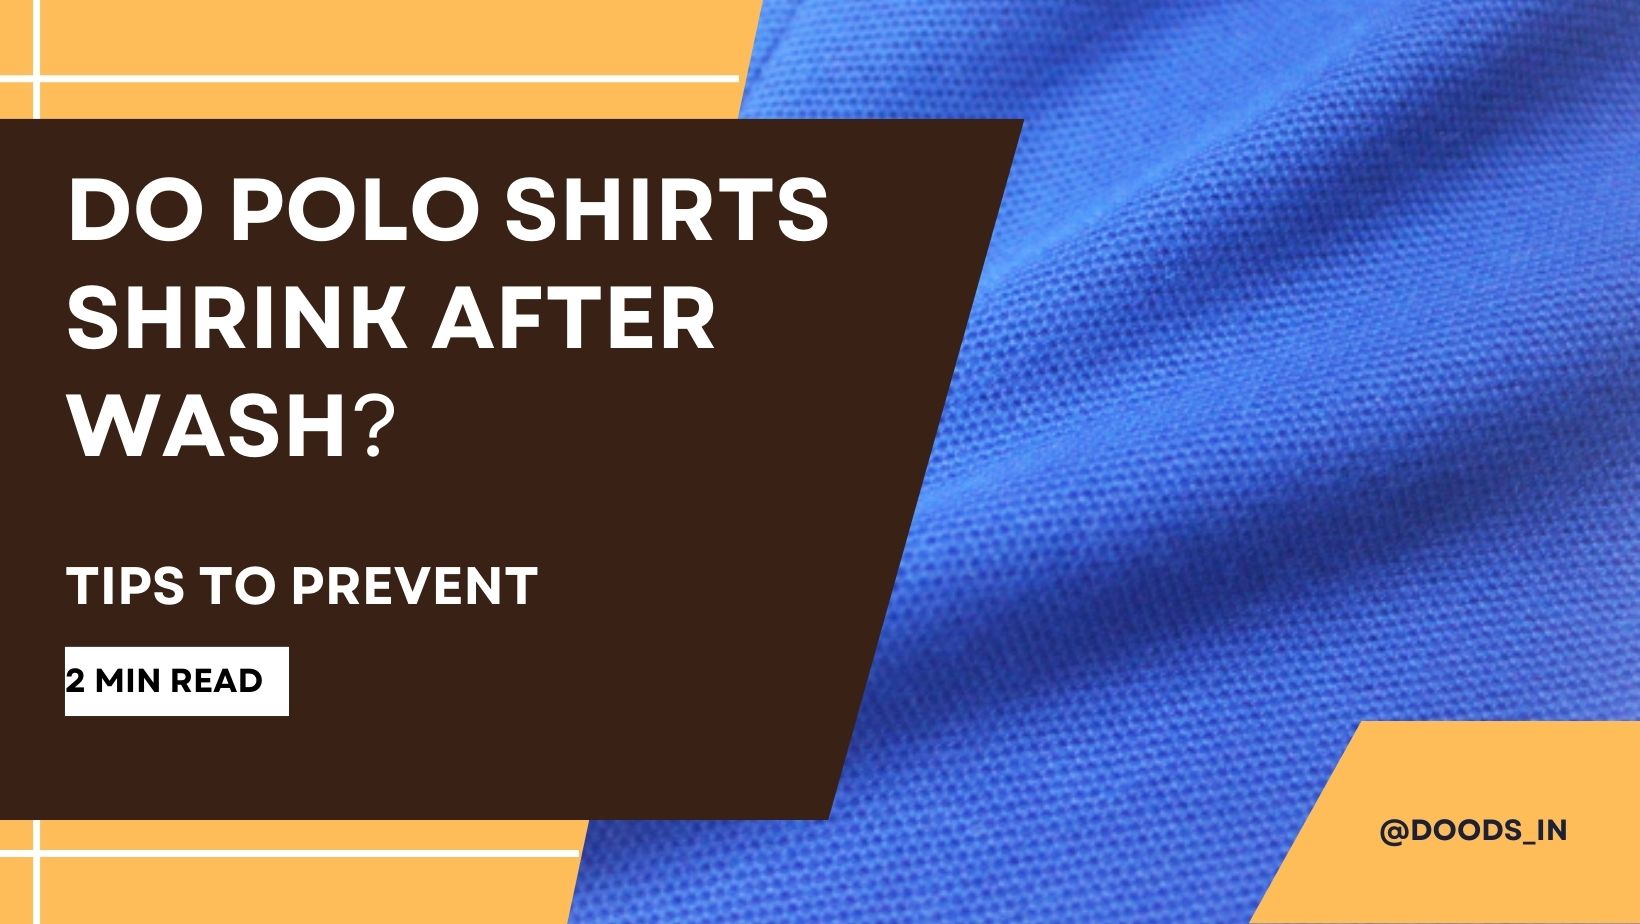 Do Polo Shirts Shrink After Wash? Tips to Prevent